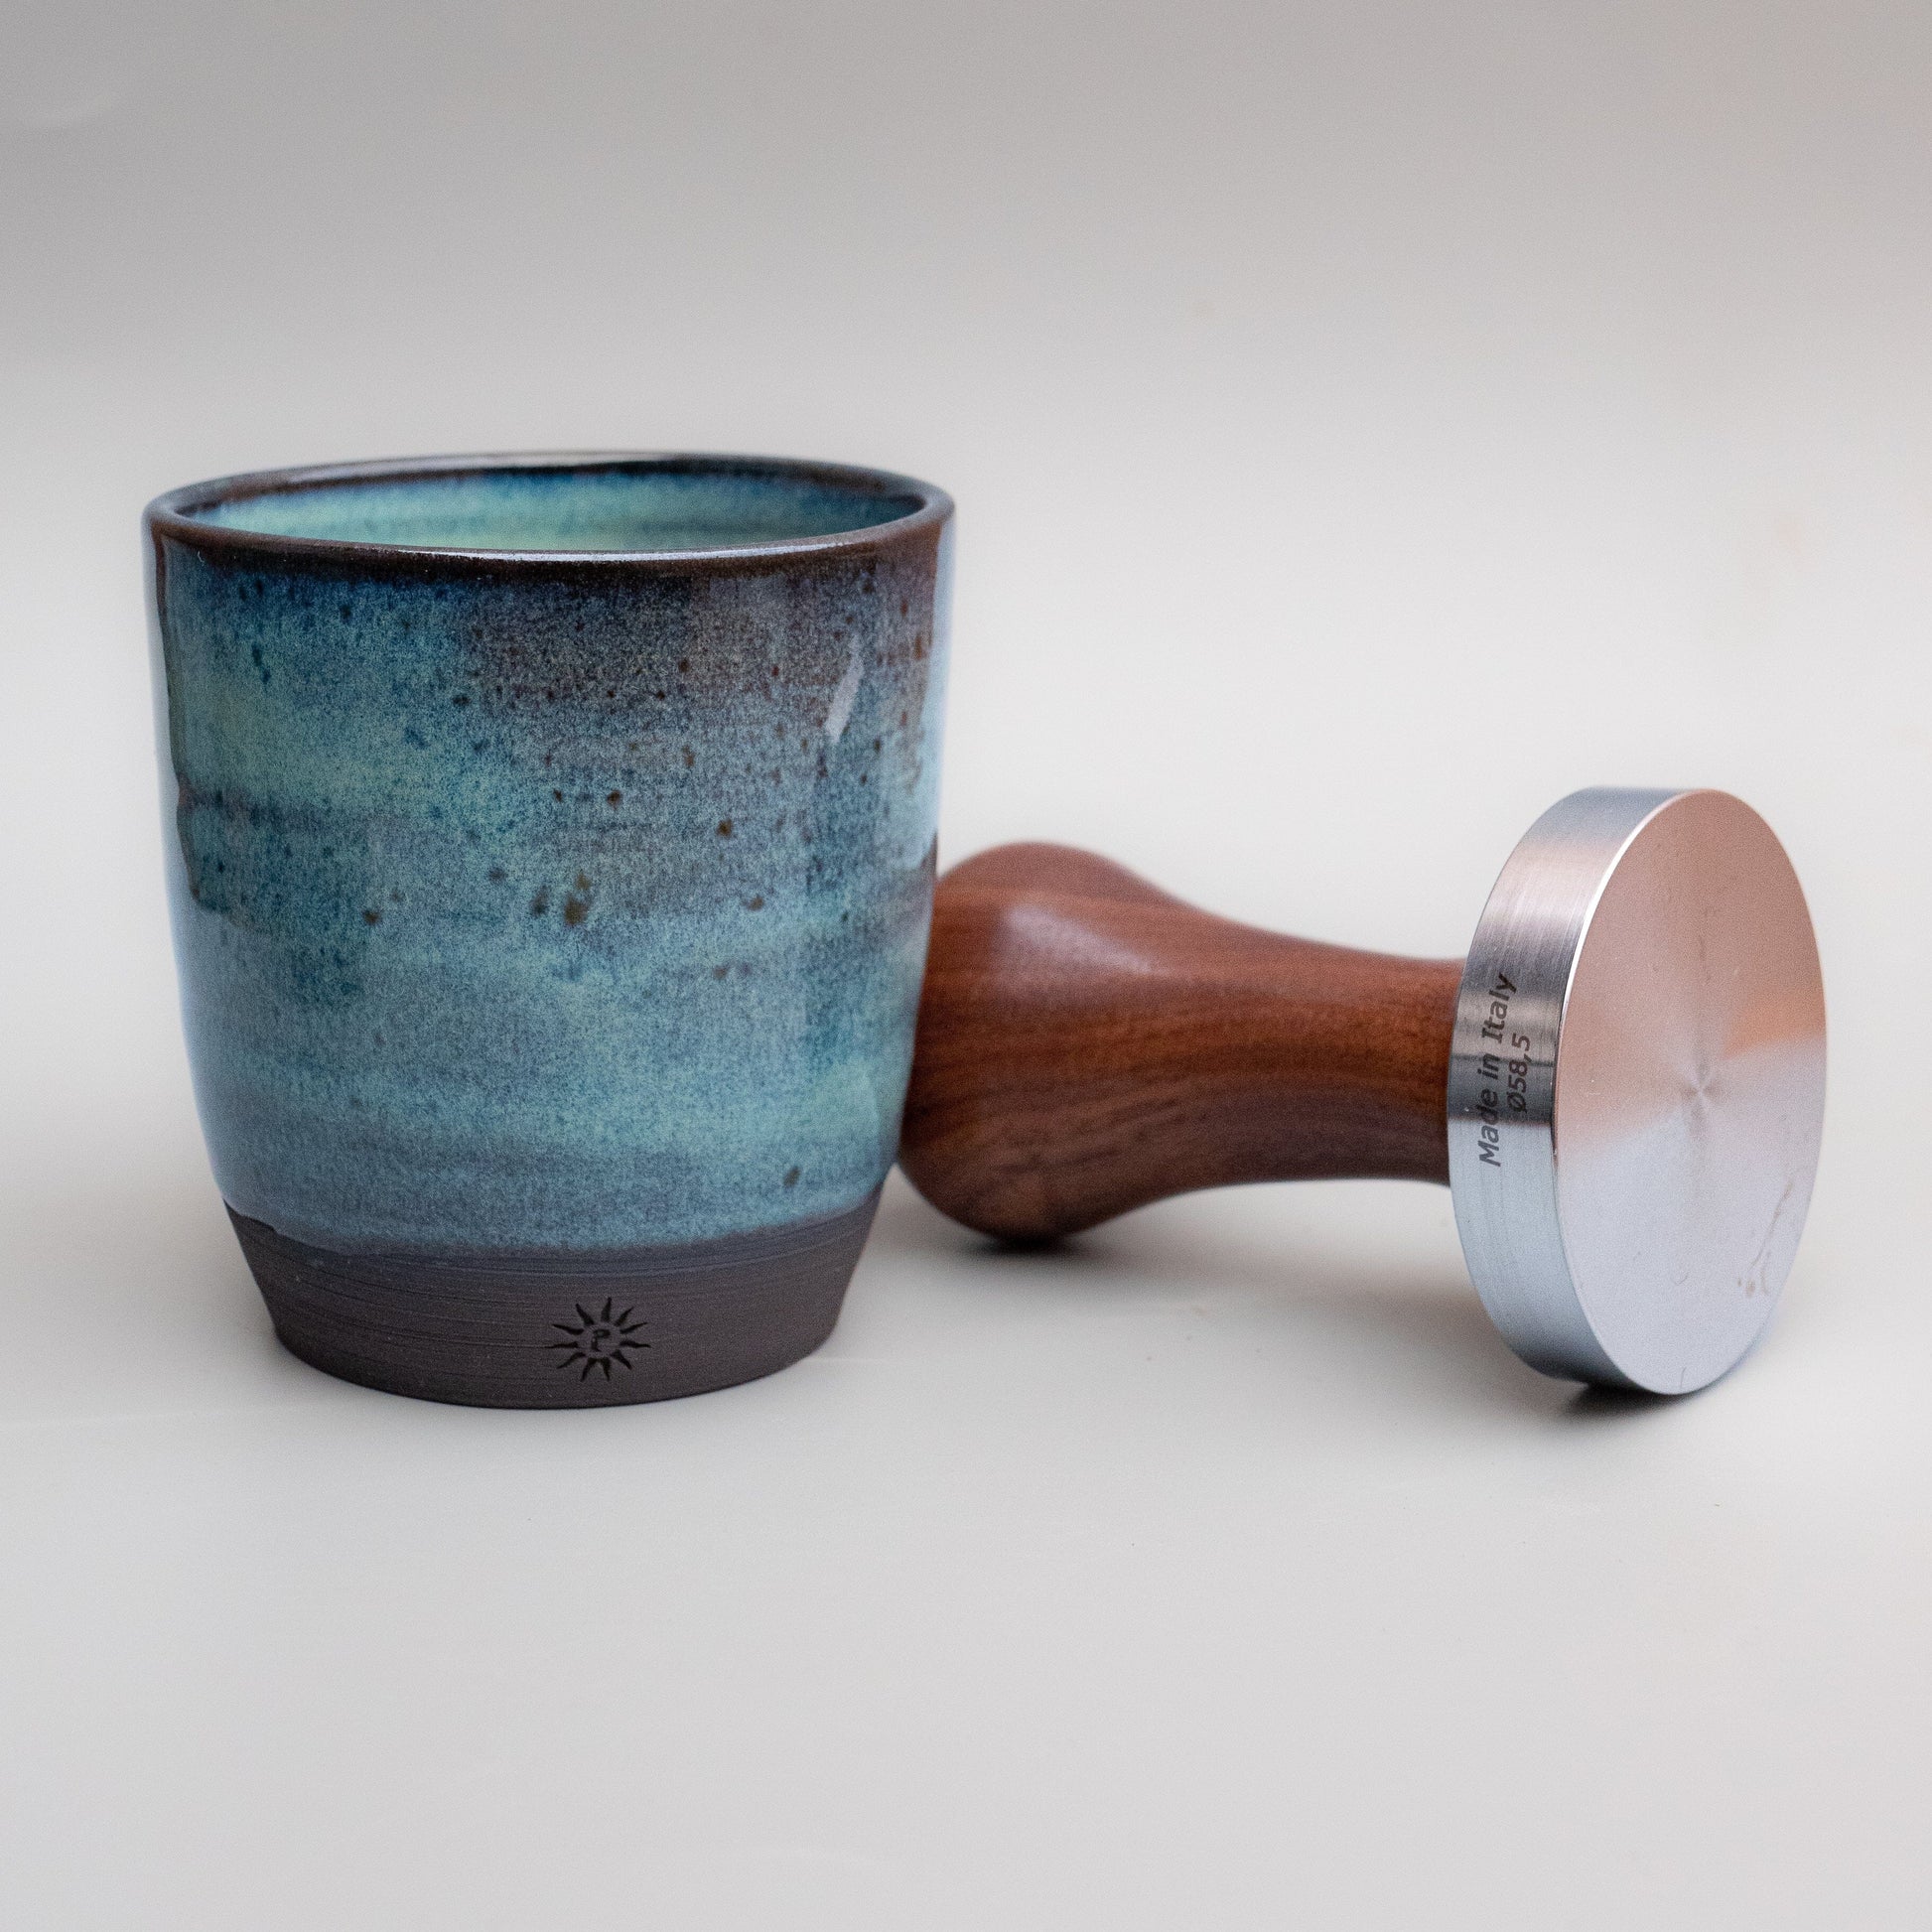 Pottery tumbler. Turquoise with coffee tamp for scale